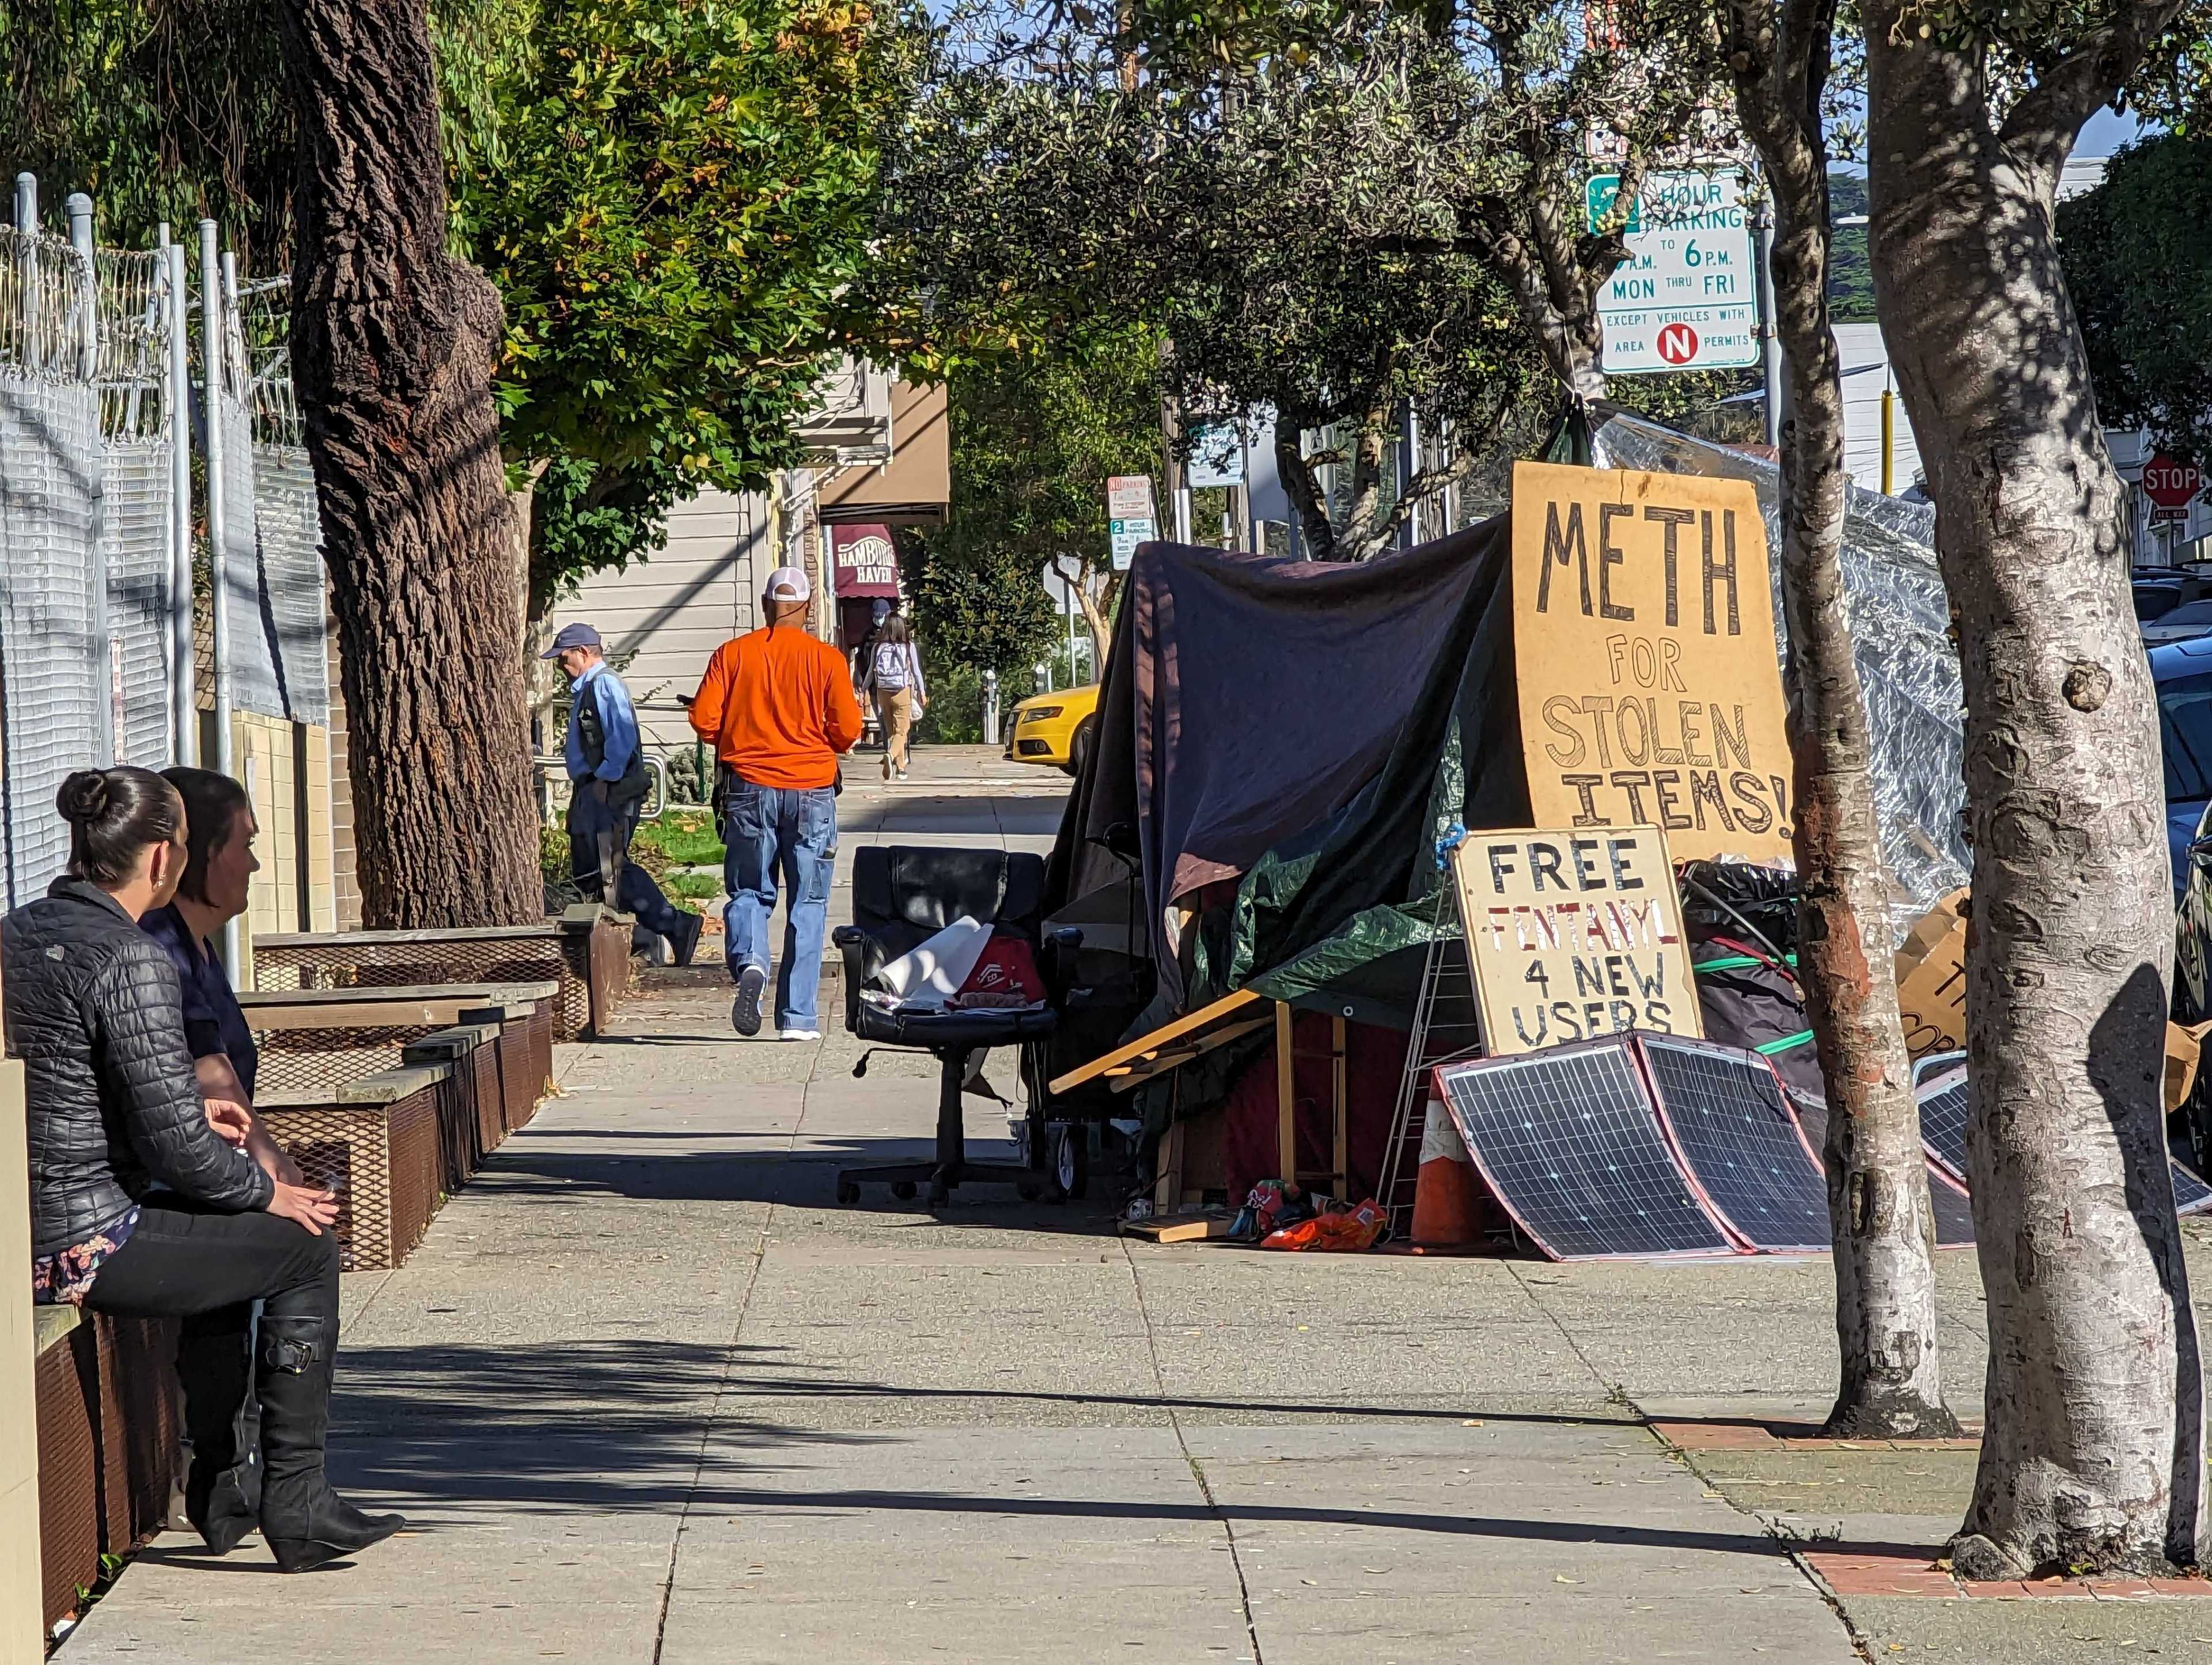 Signs reading &quot;Meth for stolen items&quot; and &quot;free fentanyl for new users&quot; sit atop Joseph Adam Moore's encampment on Ninth Avenue north of Geary Boulevard in San Francisco's Inner Richmond neighborhood.